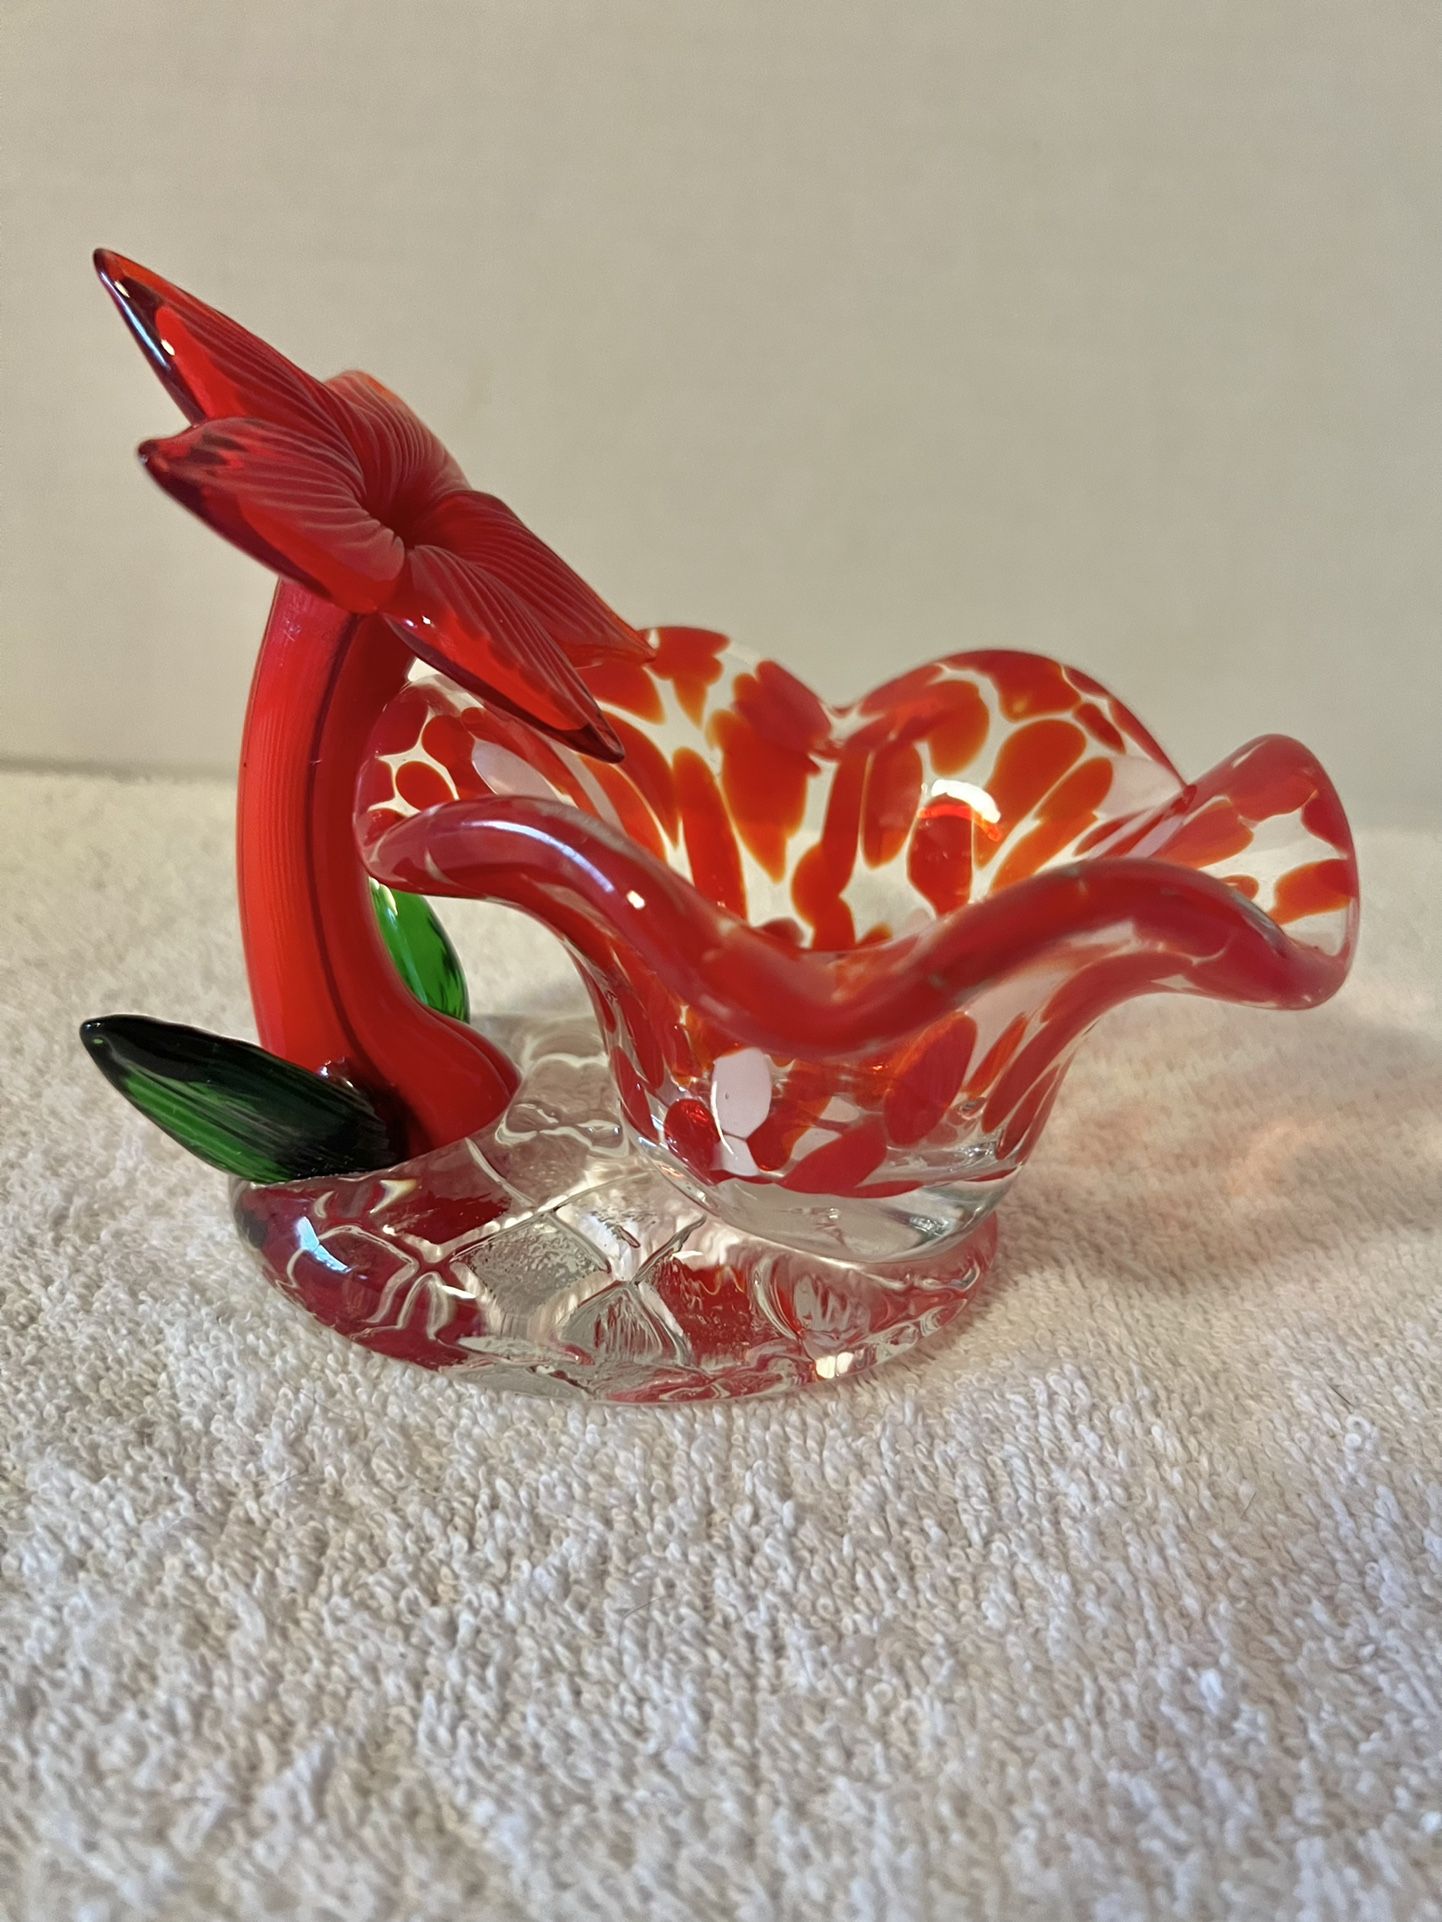 VTG Blown Glass Flower With Attached Bowl/Candy/Decor/Glows